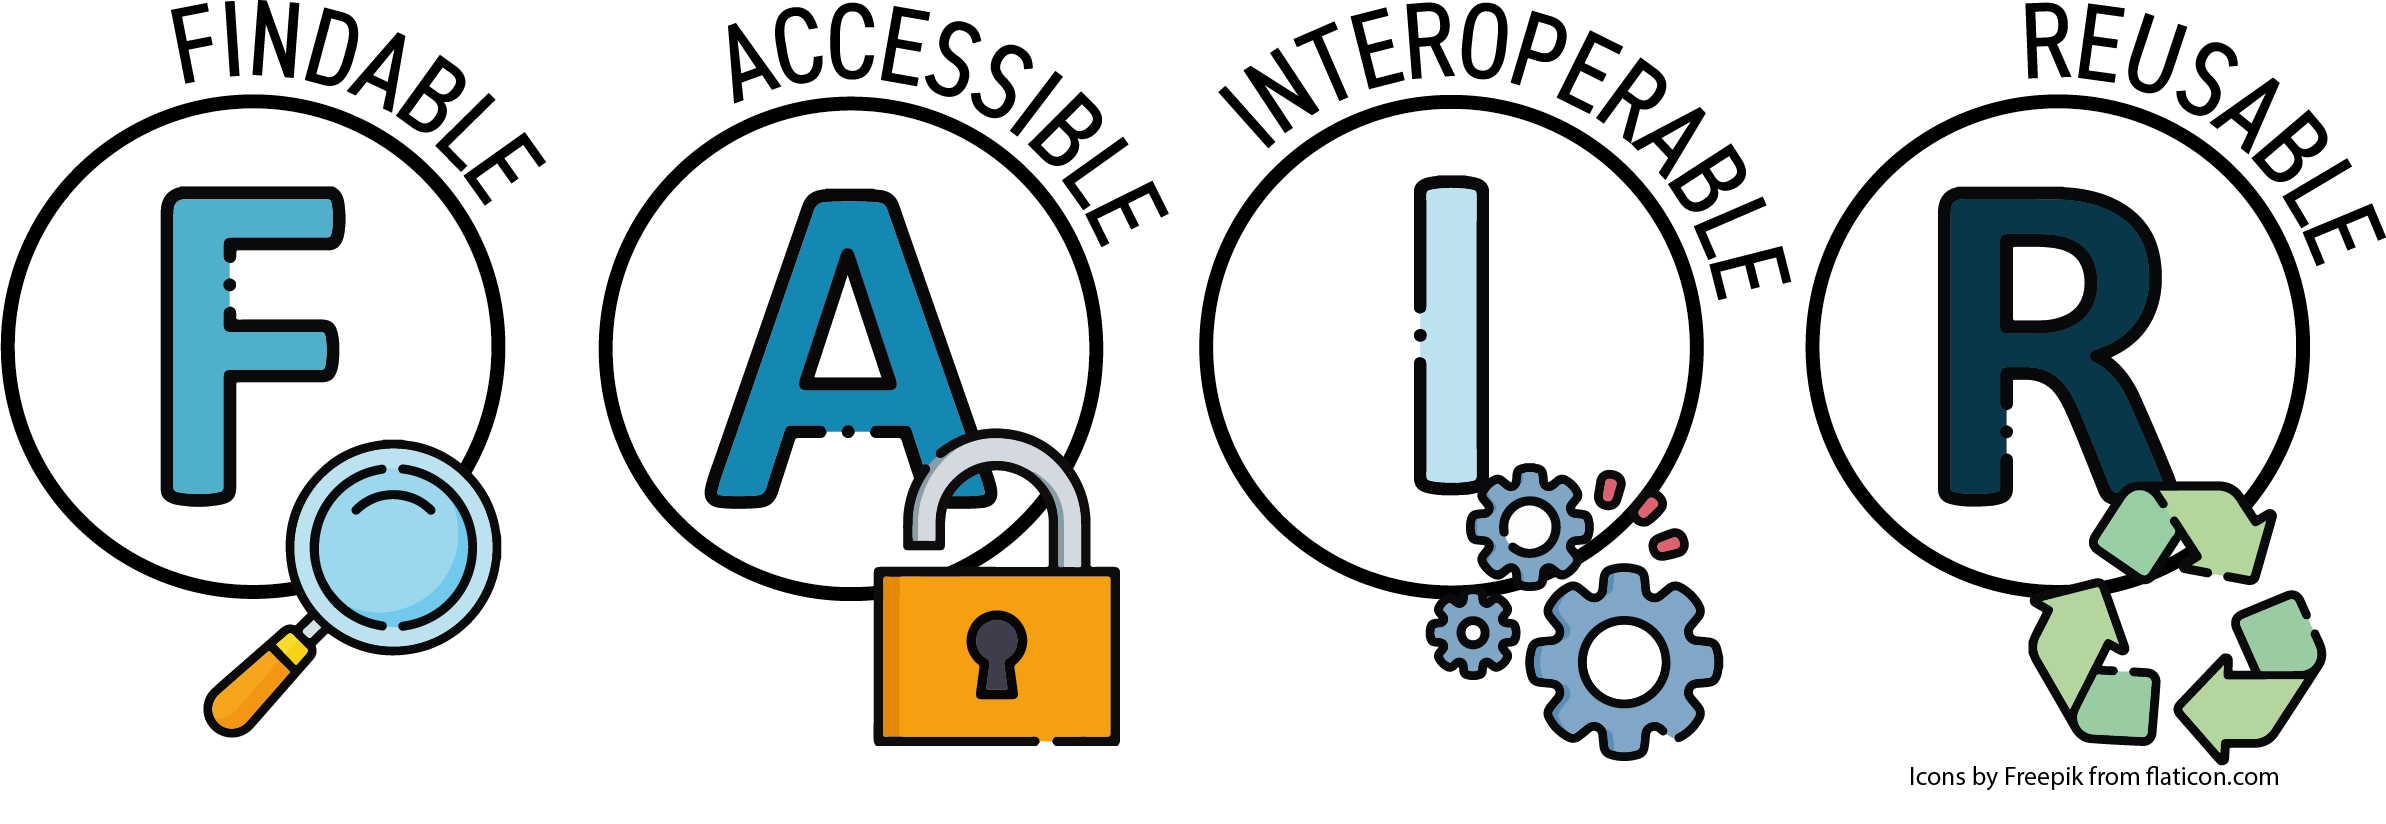 A graphic showing the 4 FAIR Principles: Findable (illustrated with a magnifying glass), Accessible (illustrated with an open lock), Interoperable (illustrated with interlocking gears) and Reusable (illustrated with a green recycling symbol)